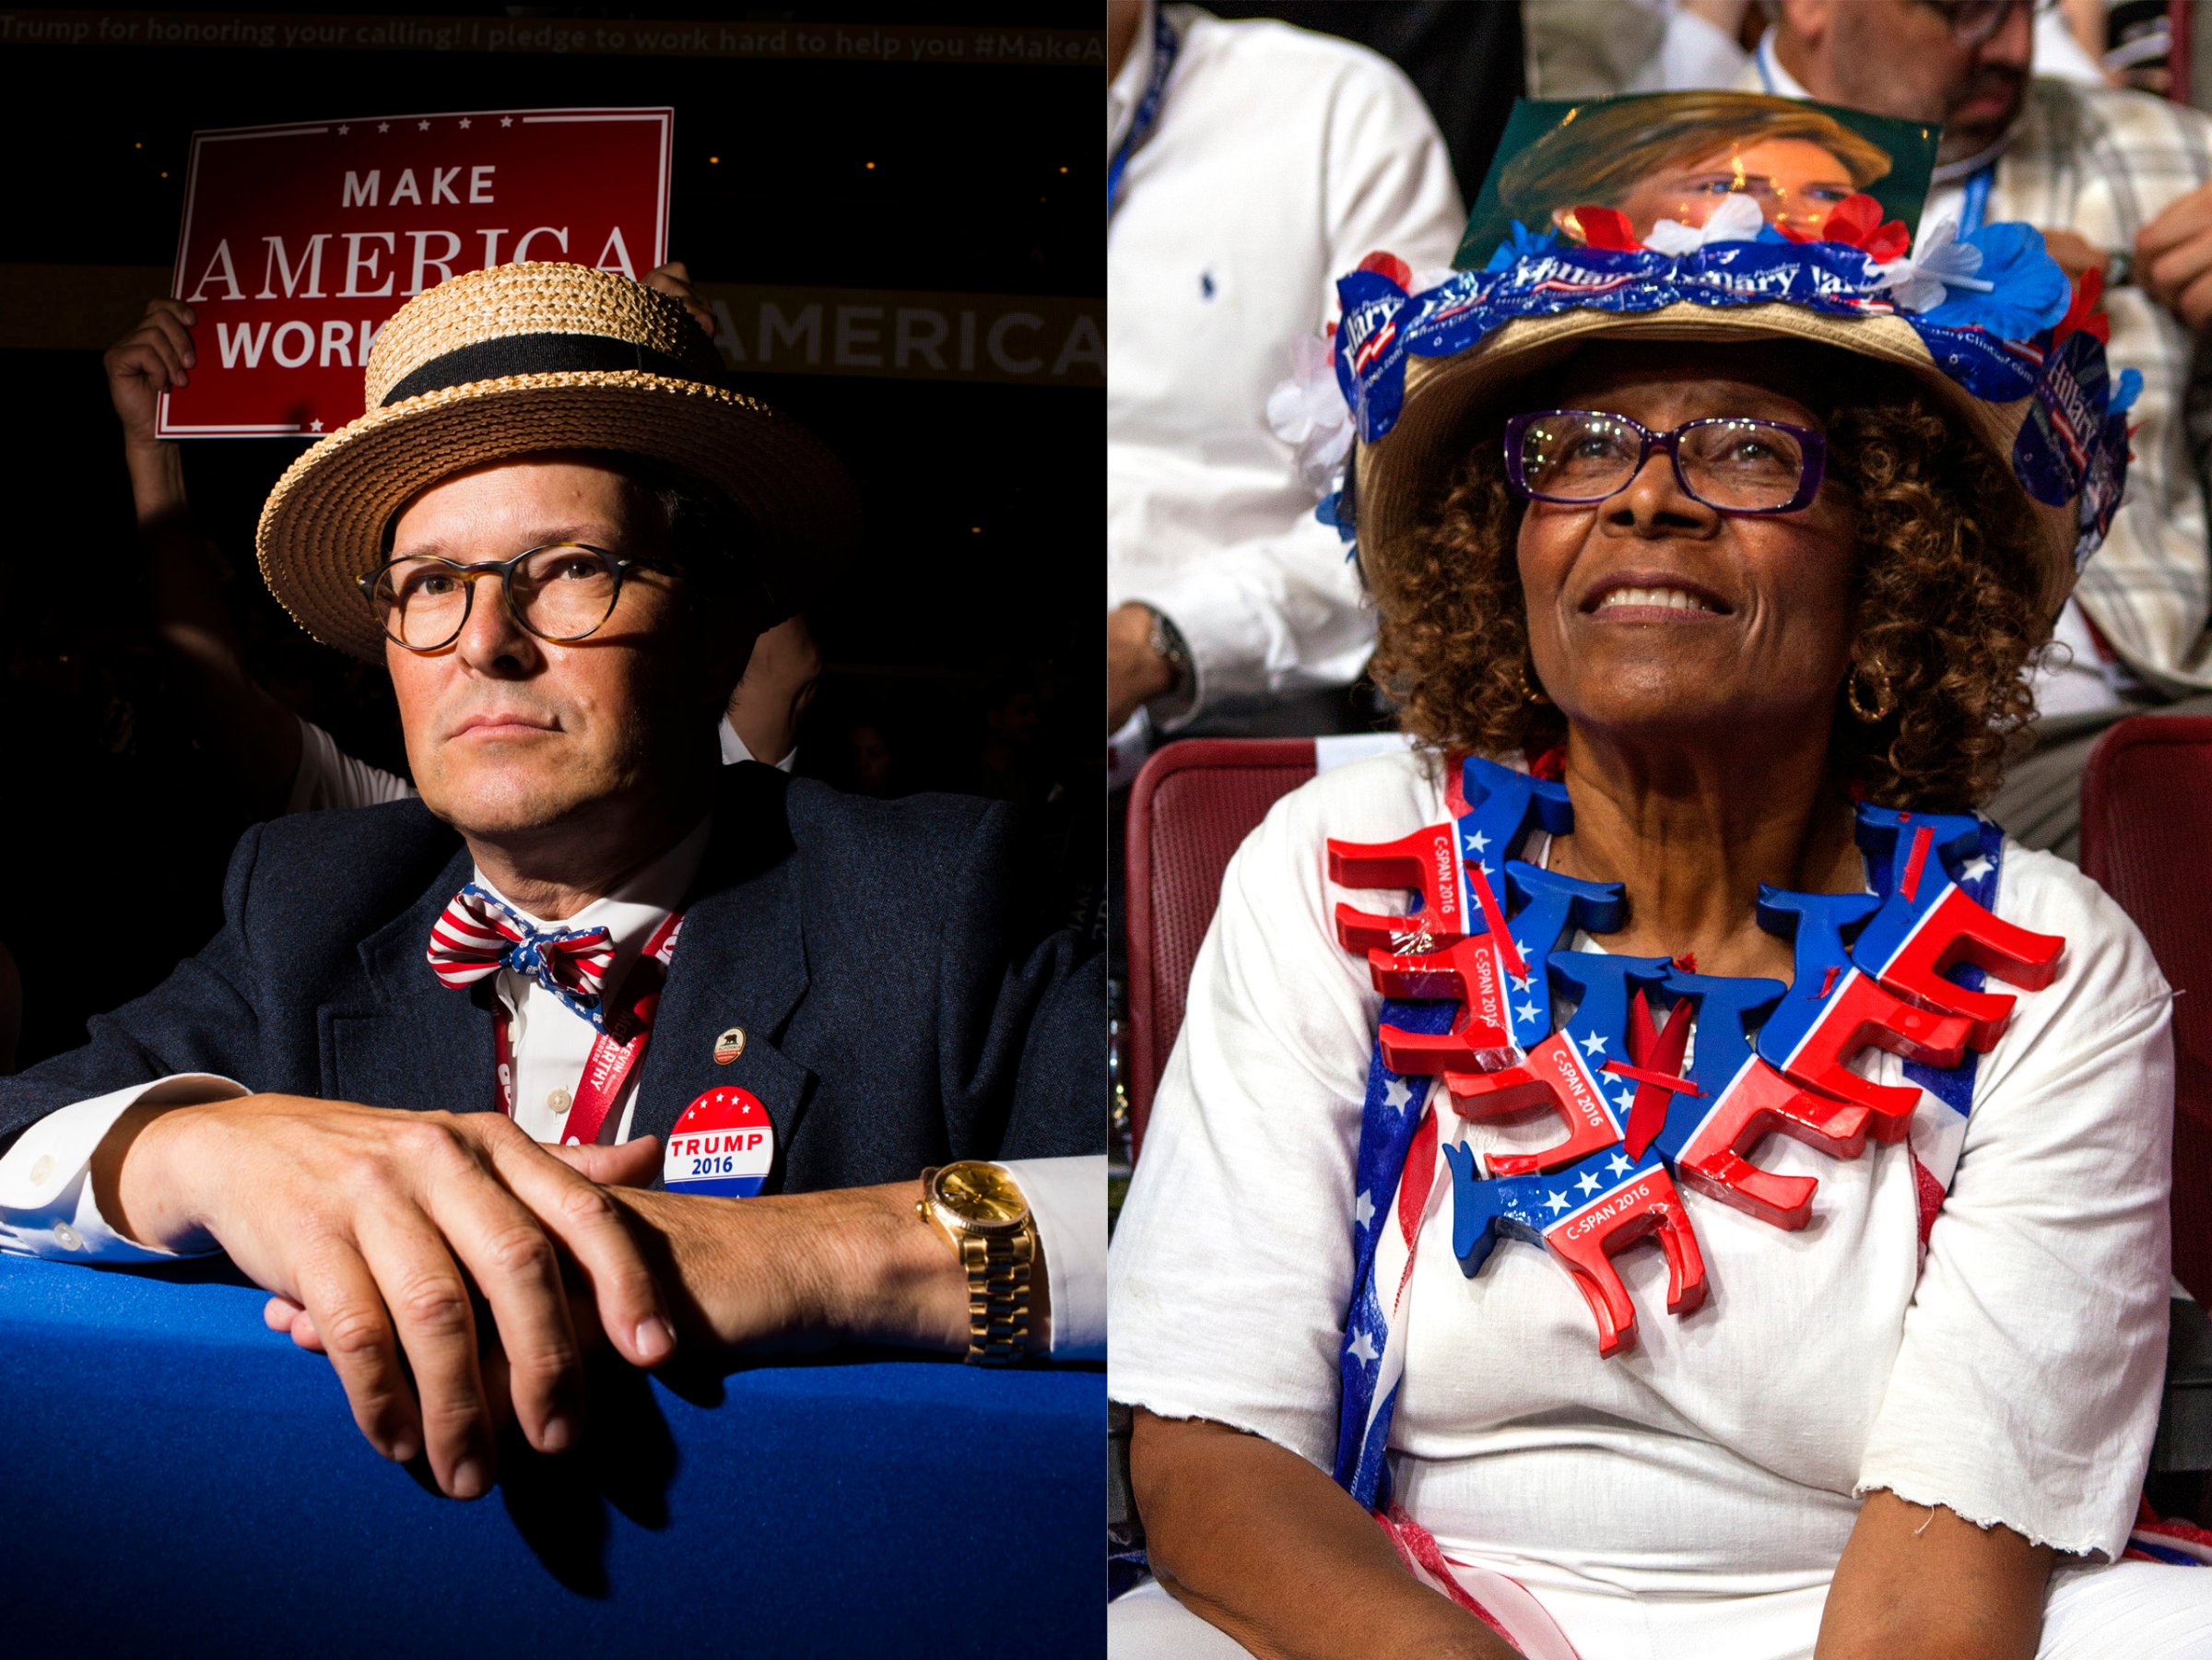 A delegate from the Republican National Convention, right, a delegate from the Democratic National Convention, left.